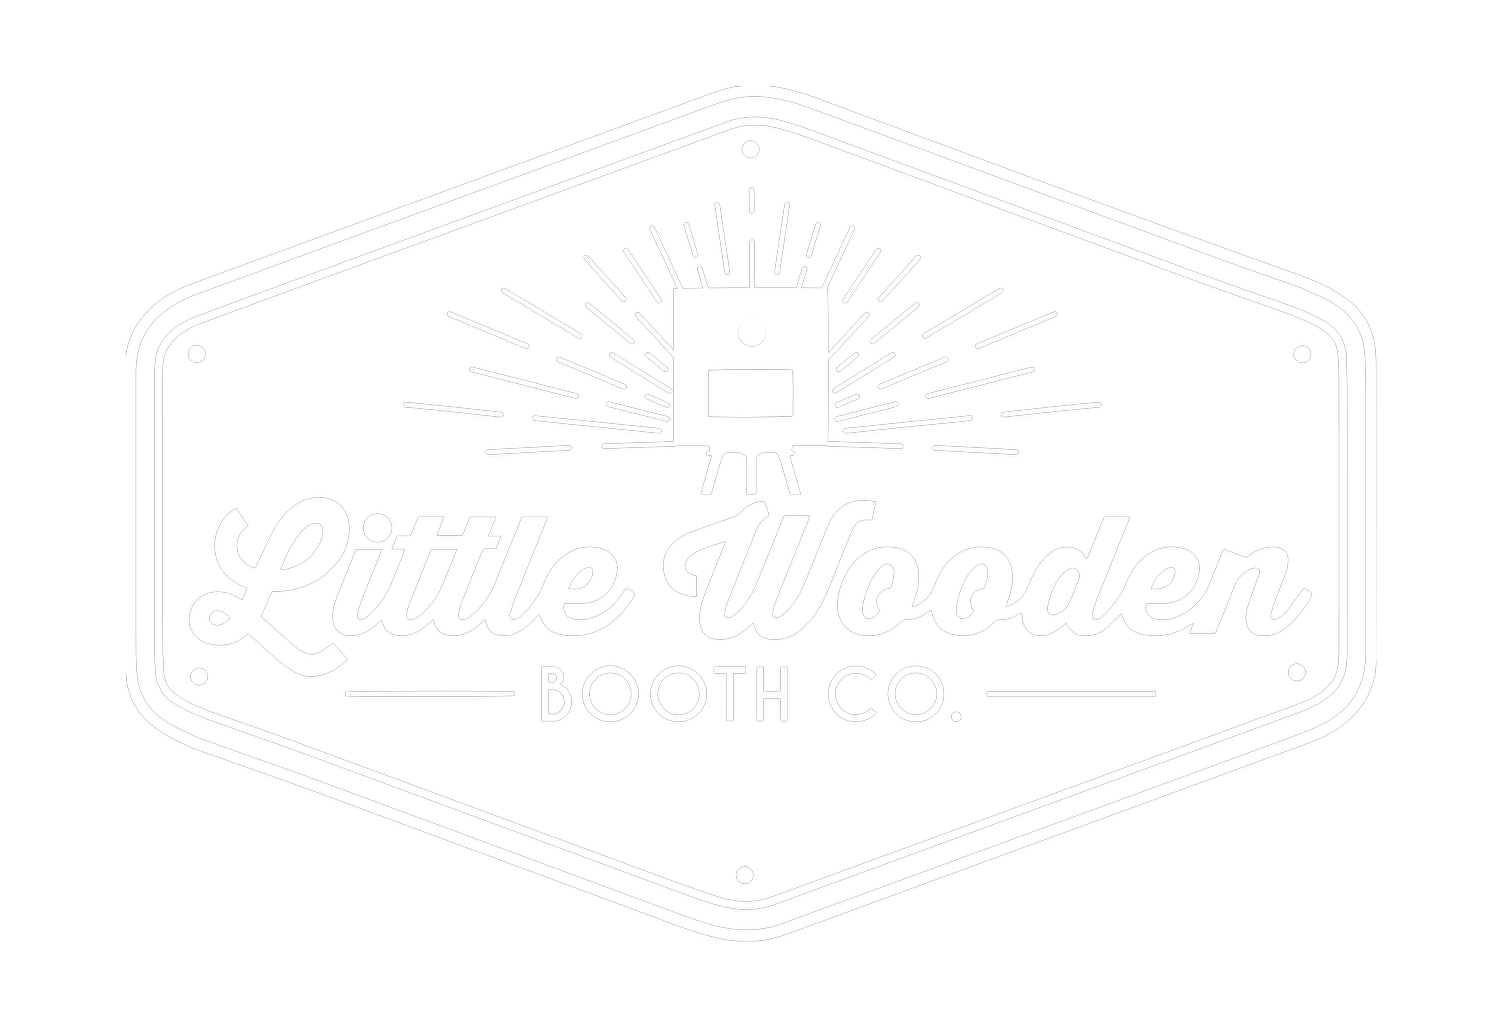 THE LITTLE WOODEN BOOTH CO.